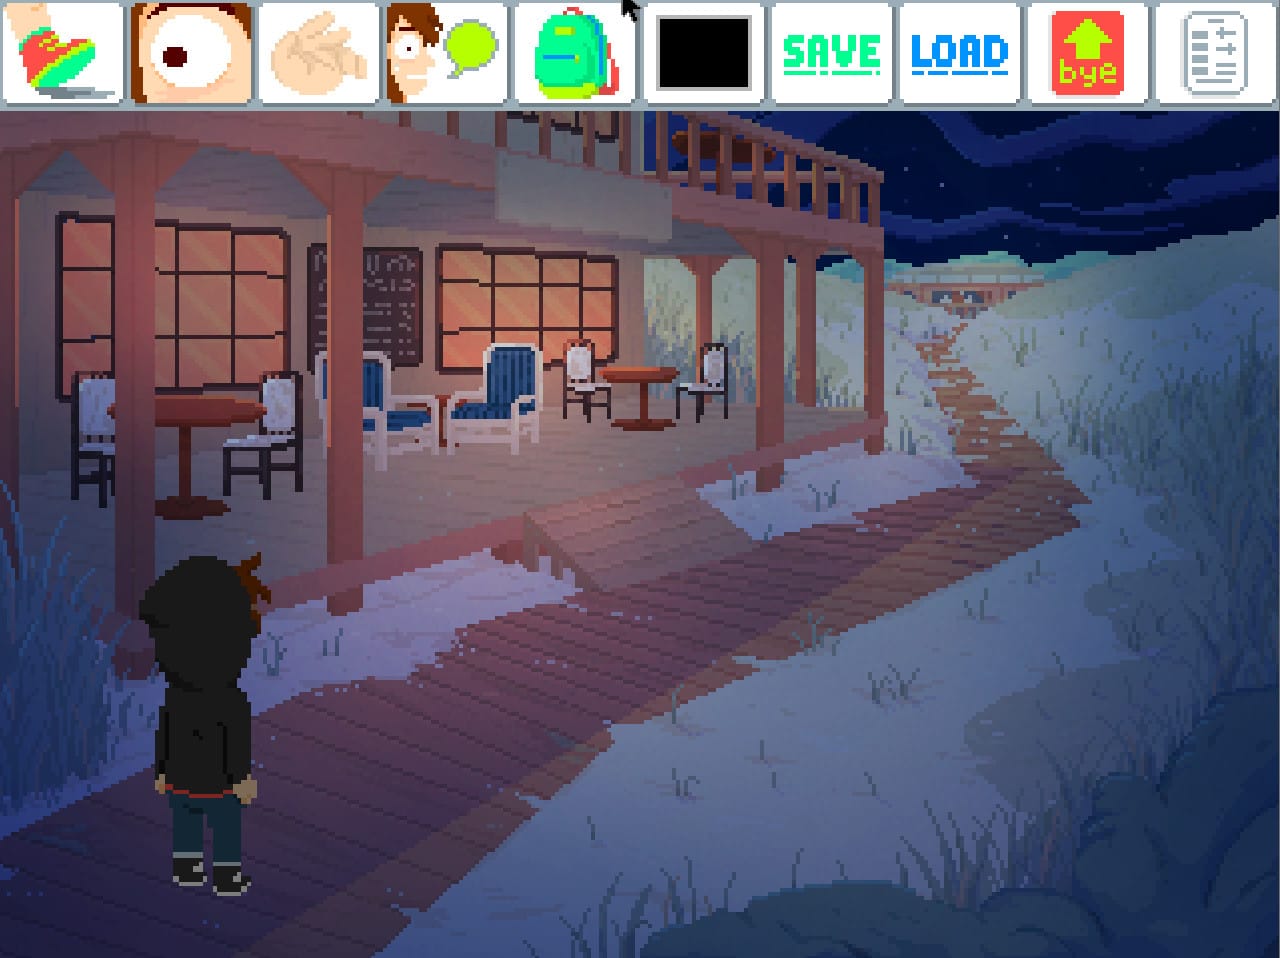 A screenshot from Perfect Tides with a character standing outside looking at a patio stacked with chairs and tables.